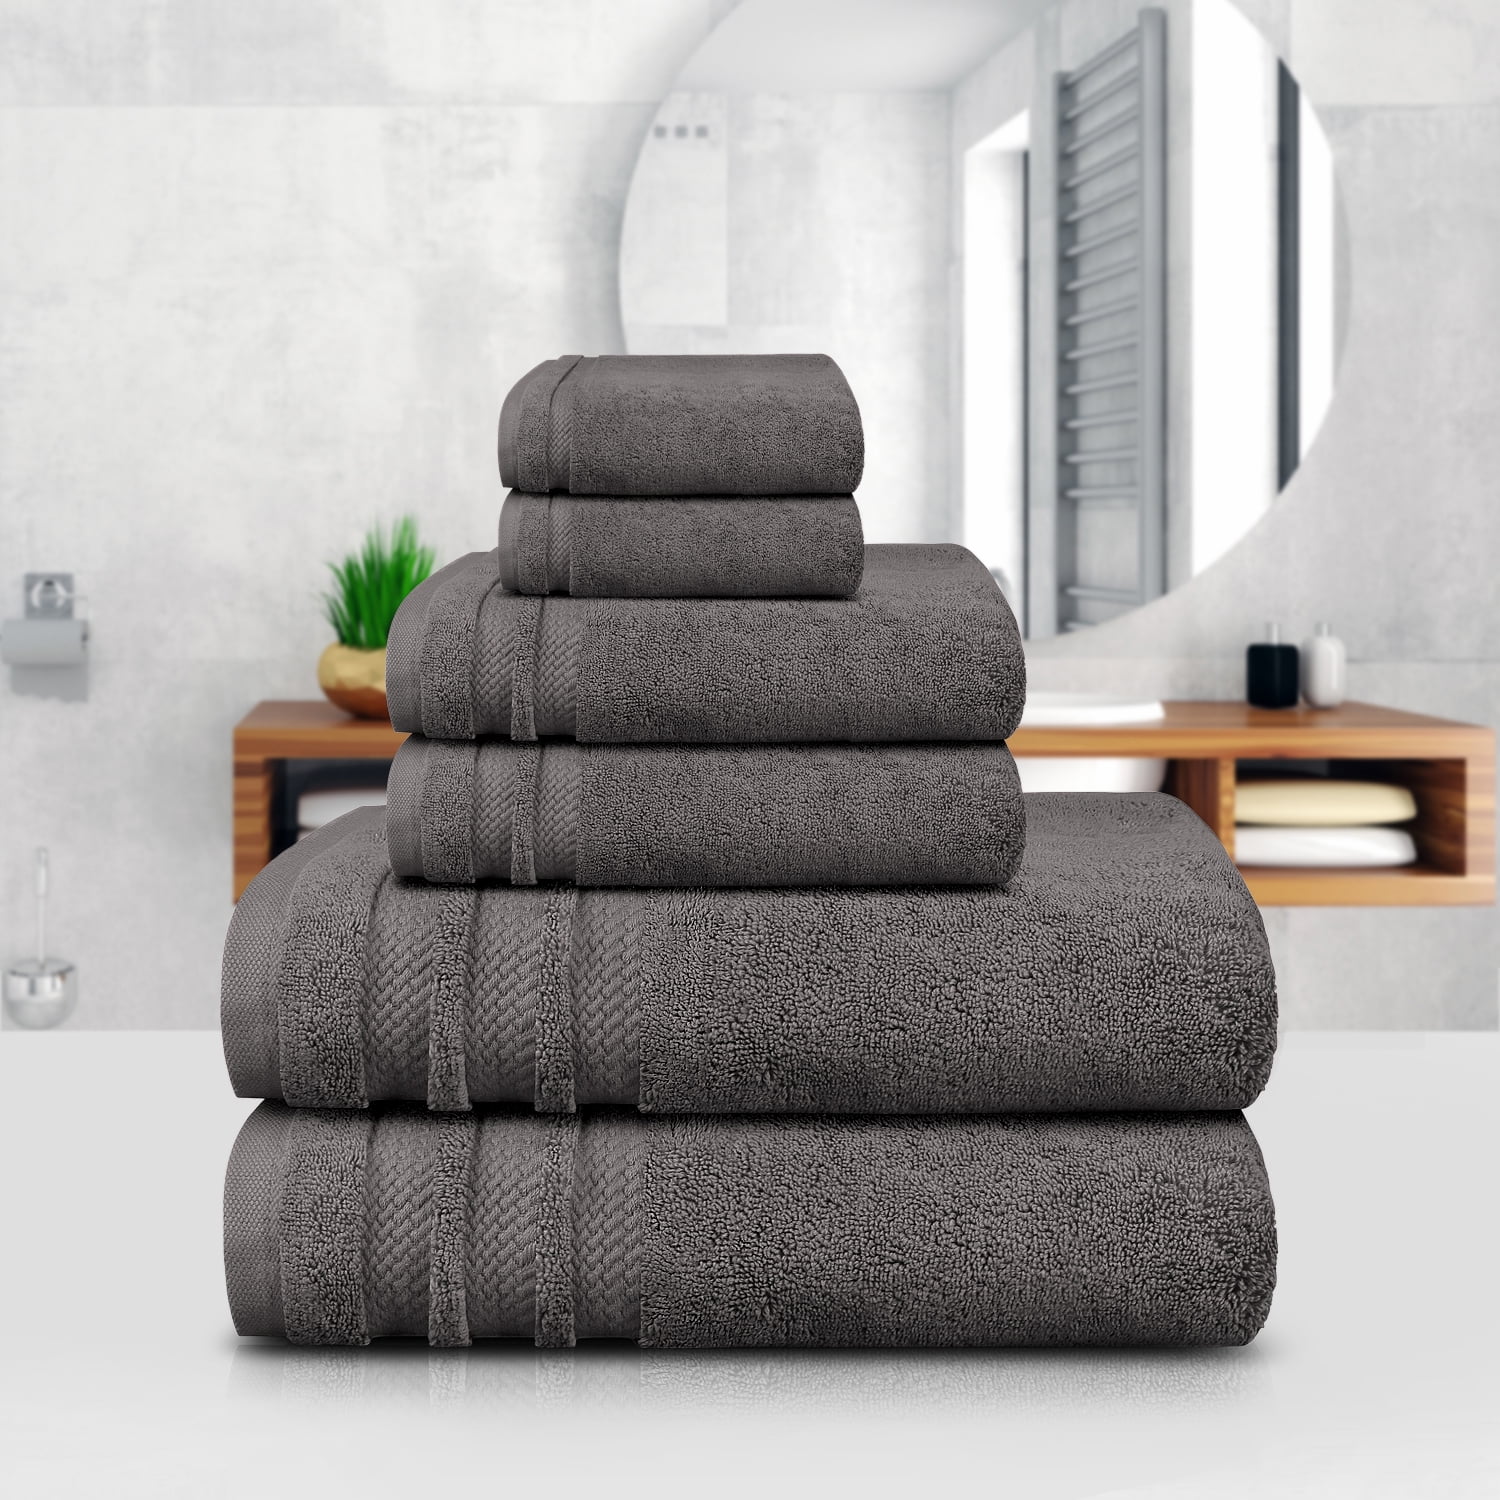 Trident Finesse Ultra Soft, Extra Large, 4 Piece Bath Towels, Super Soft,  Extra Absorbent, 625 GSM, White 